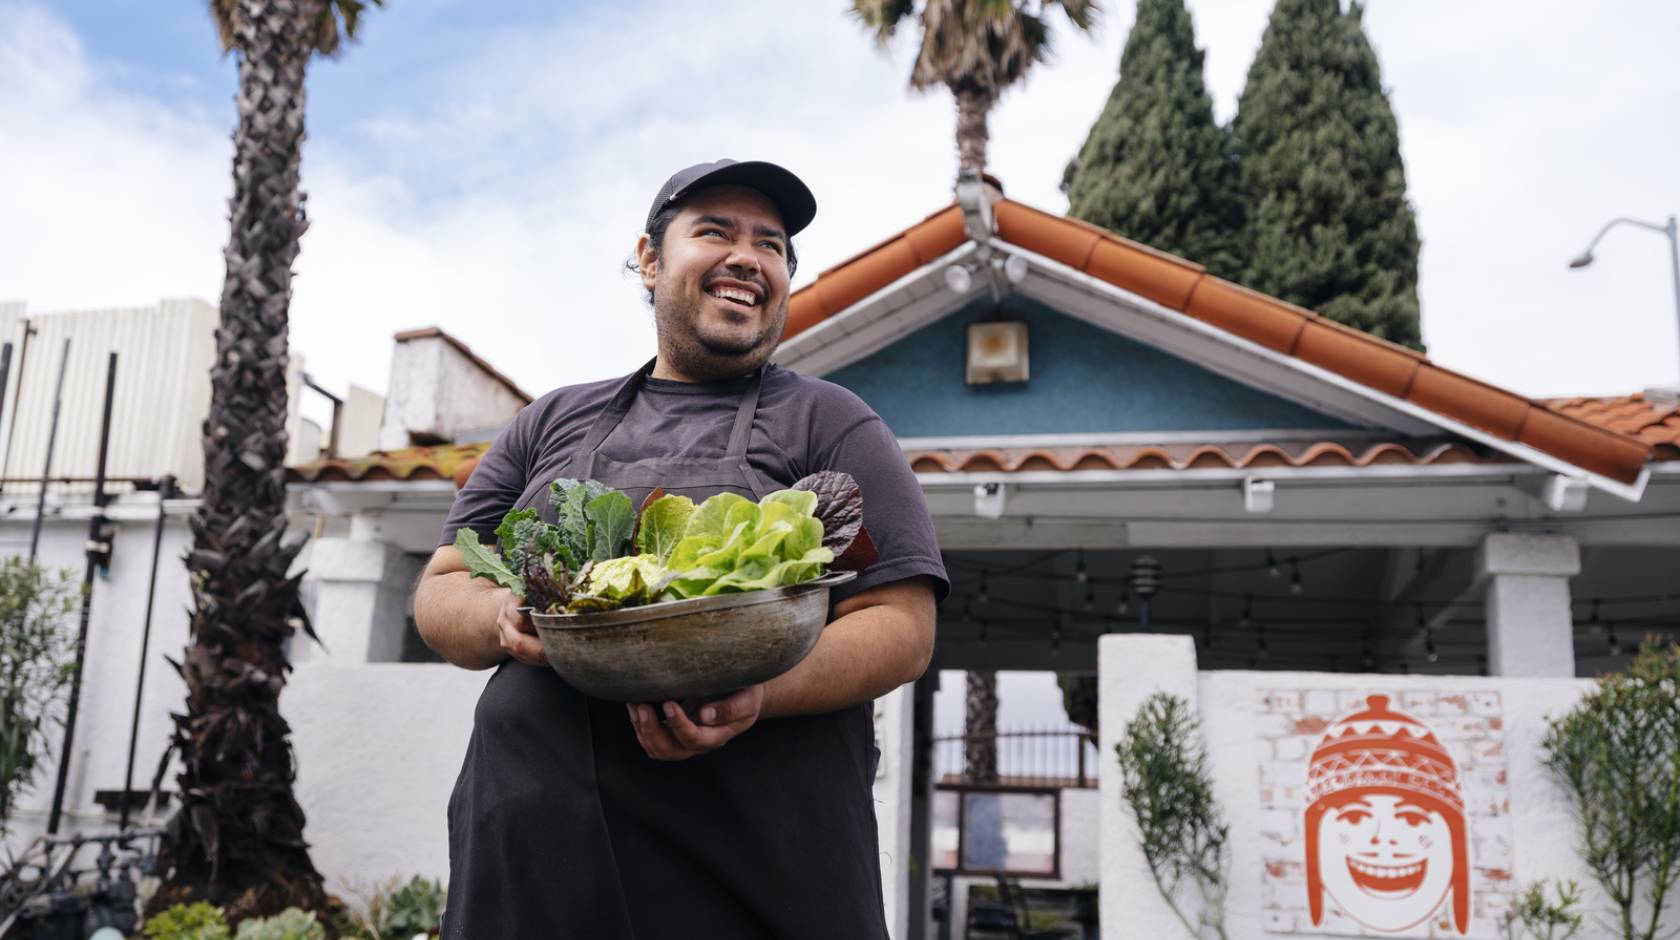 A young man smiles looking up and away from the camera, holding an armful of recently harvested lettuces. He's standing in front of a low green building with palm trees in the background. It looks like LA. 